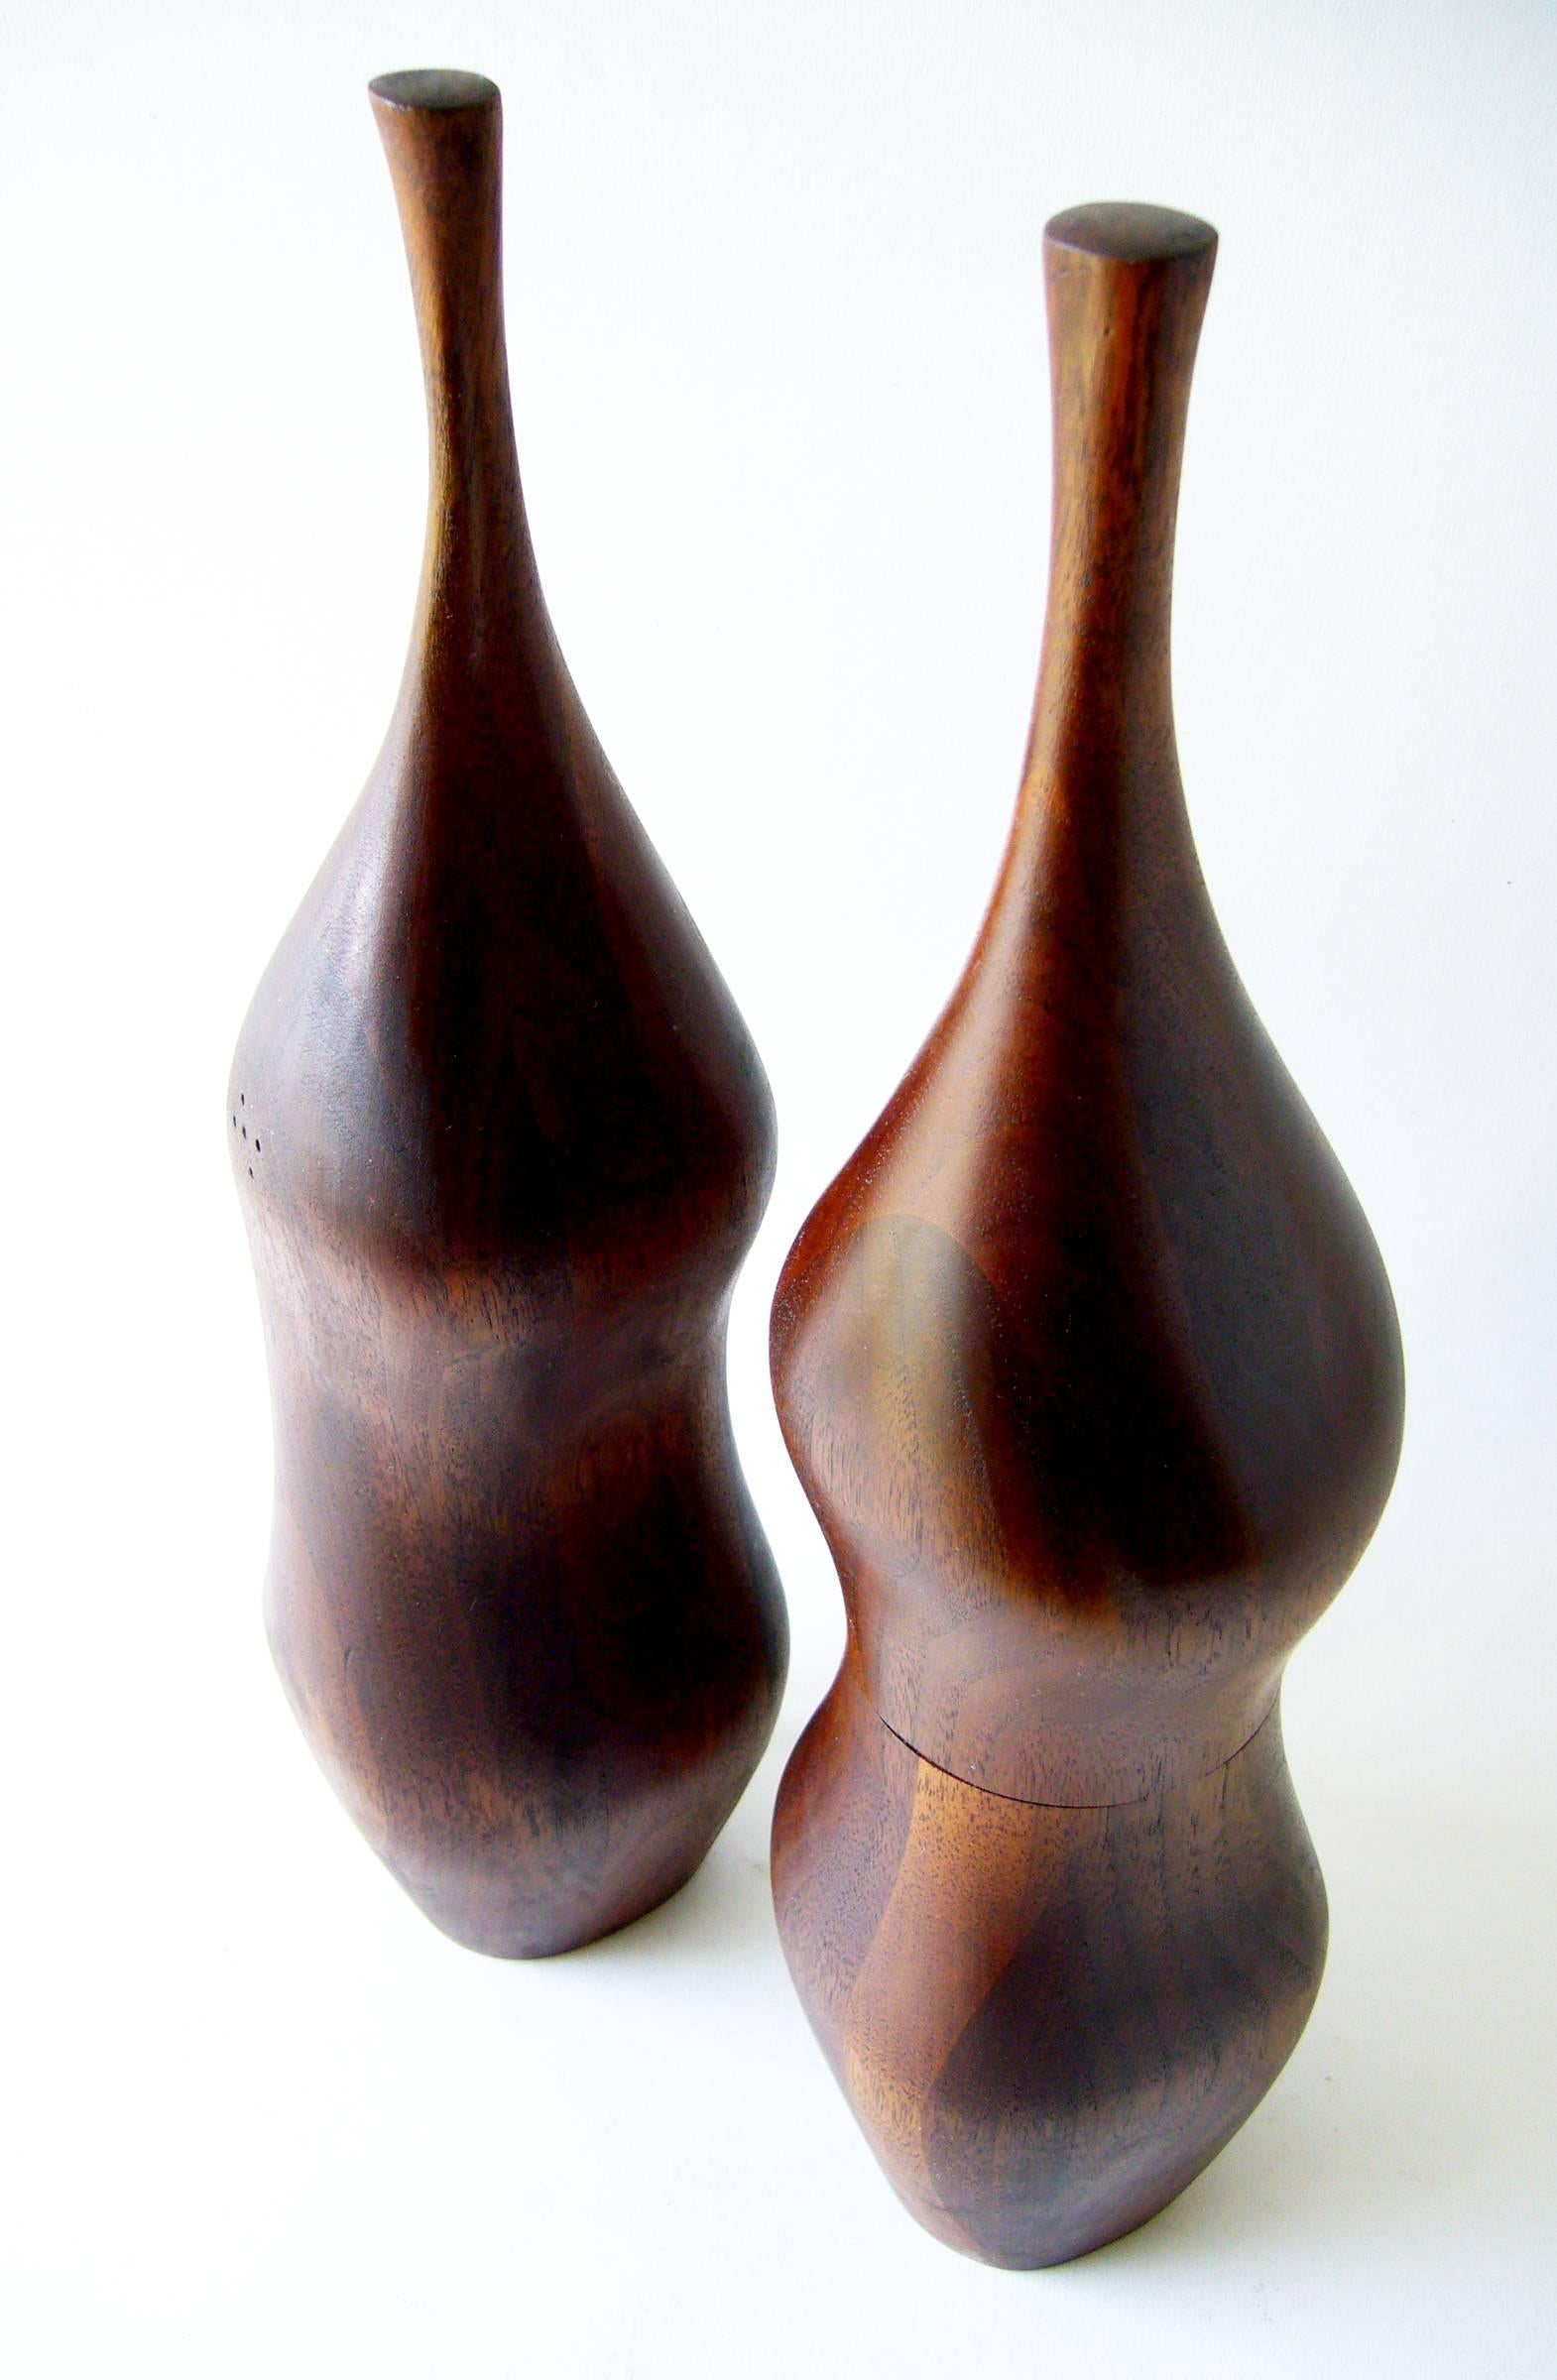 Sculptural, hand-carved laminated fruitwood salt Shaker and peppermill created by Daniel Loomis Valenza of New Hampshire. Large in scale and measuring 15.5